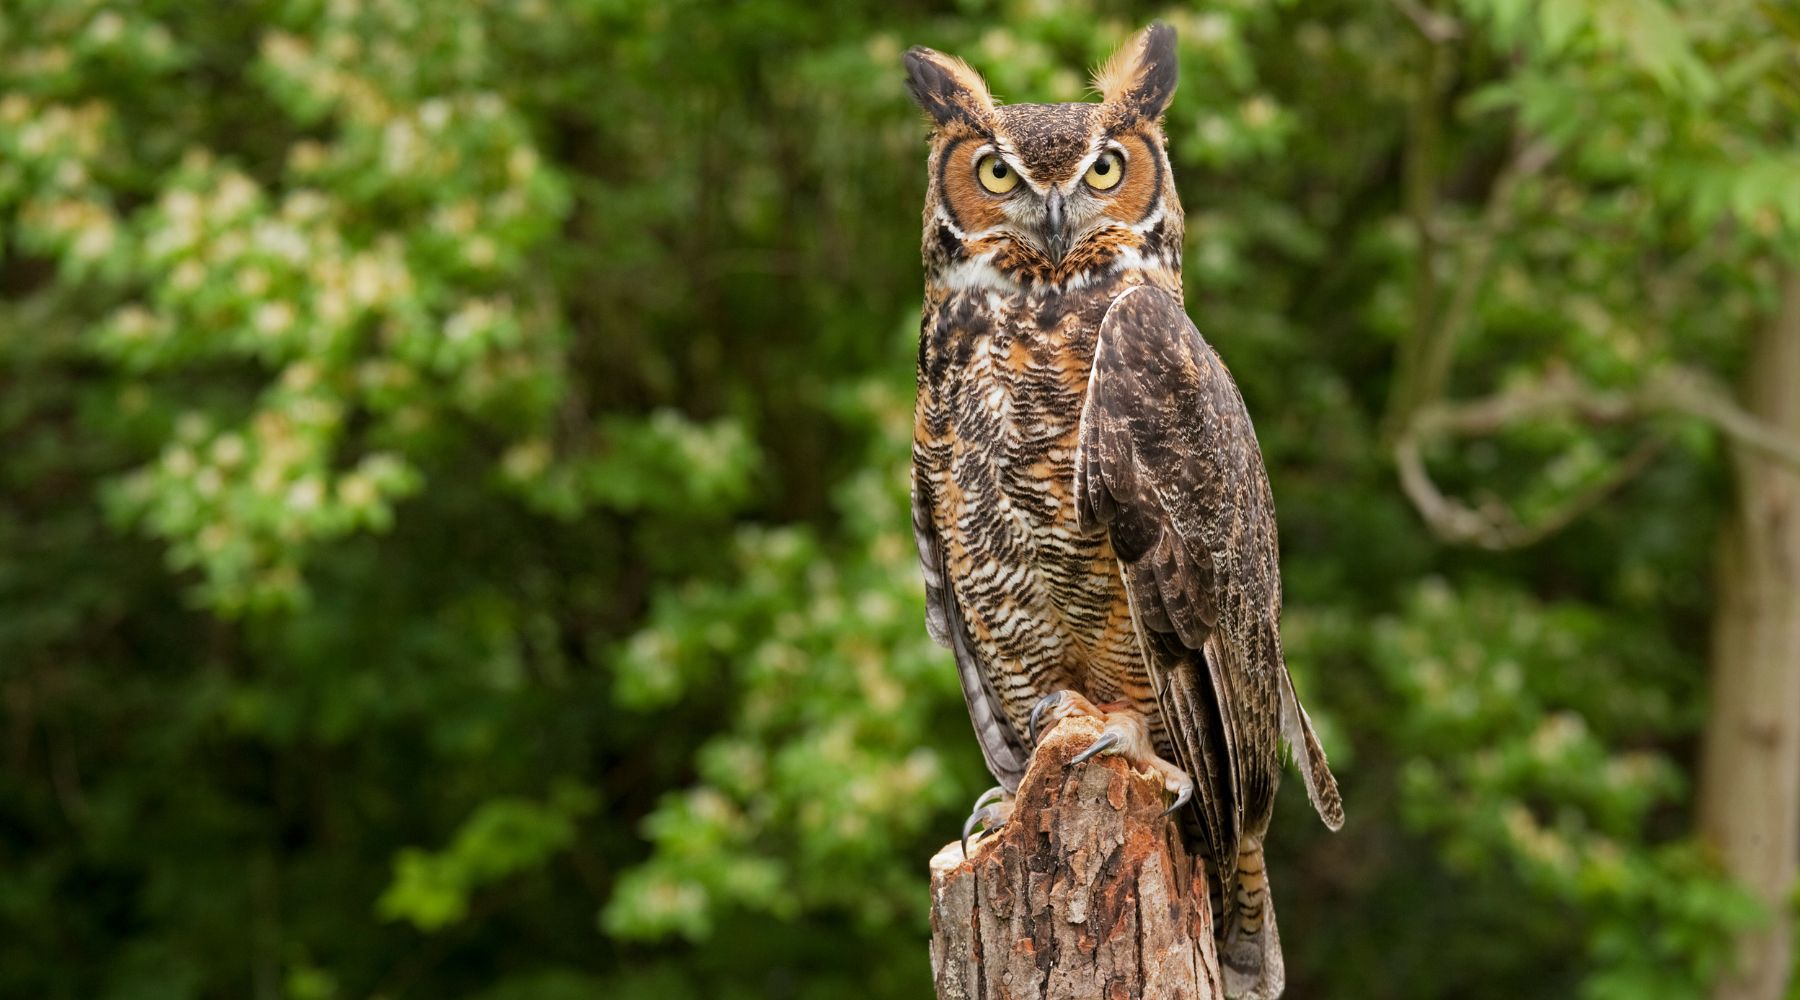 Great Horned Owl perched on tree stump